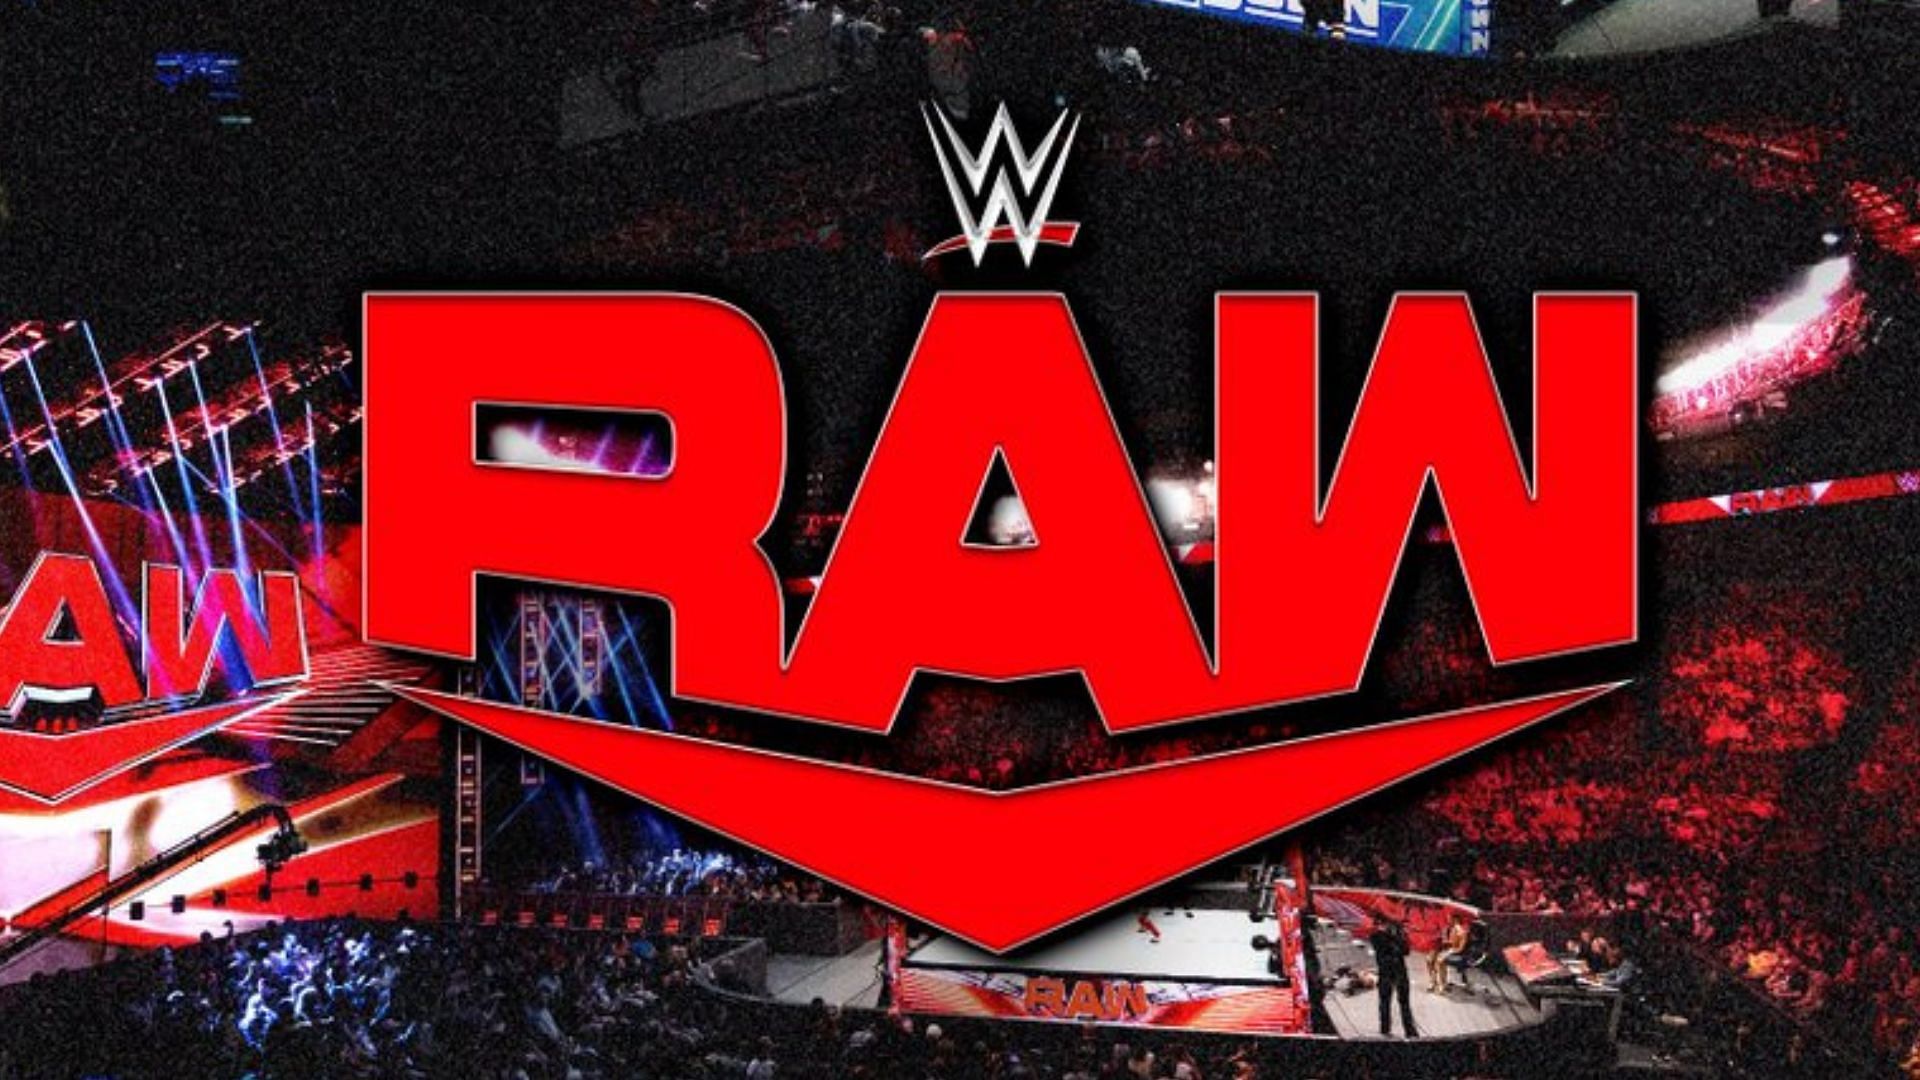 WWE RAW is the longest-running weekly program in the company!